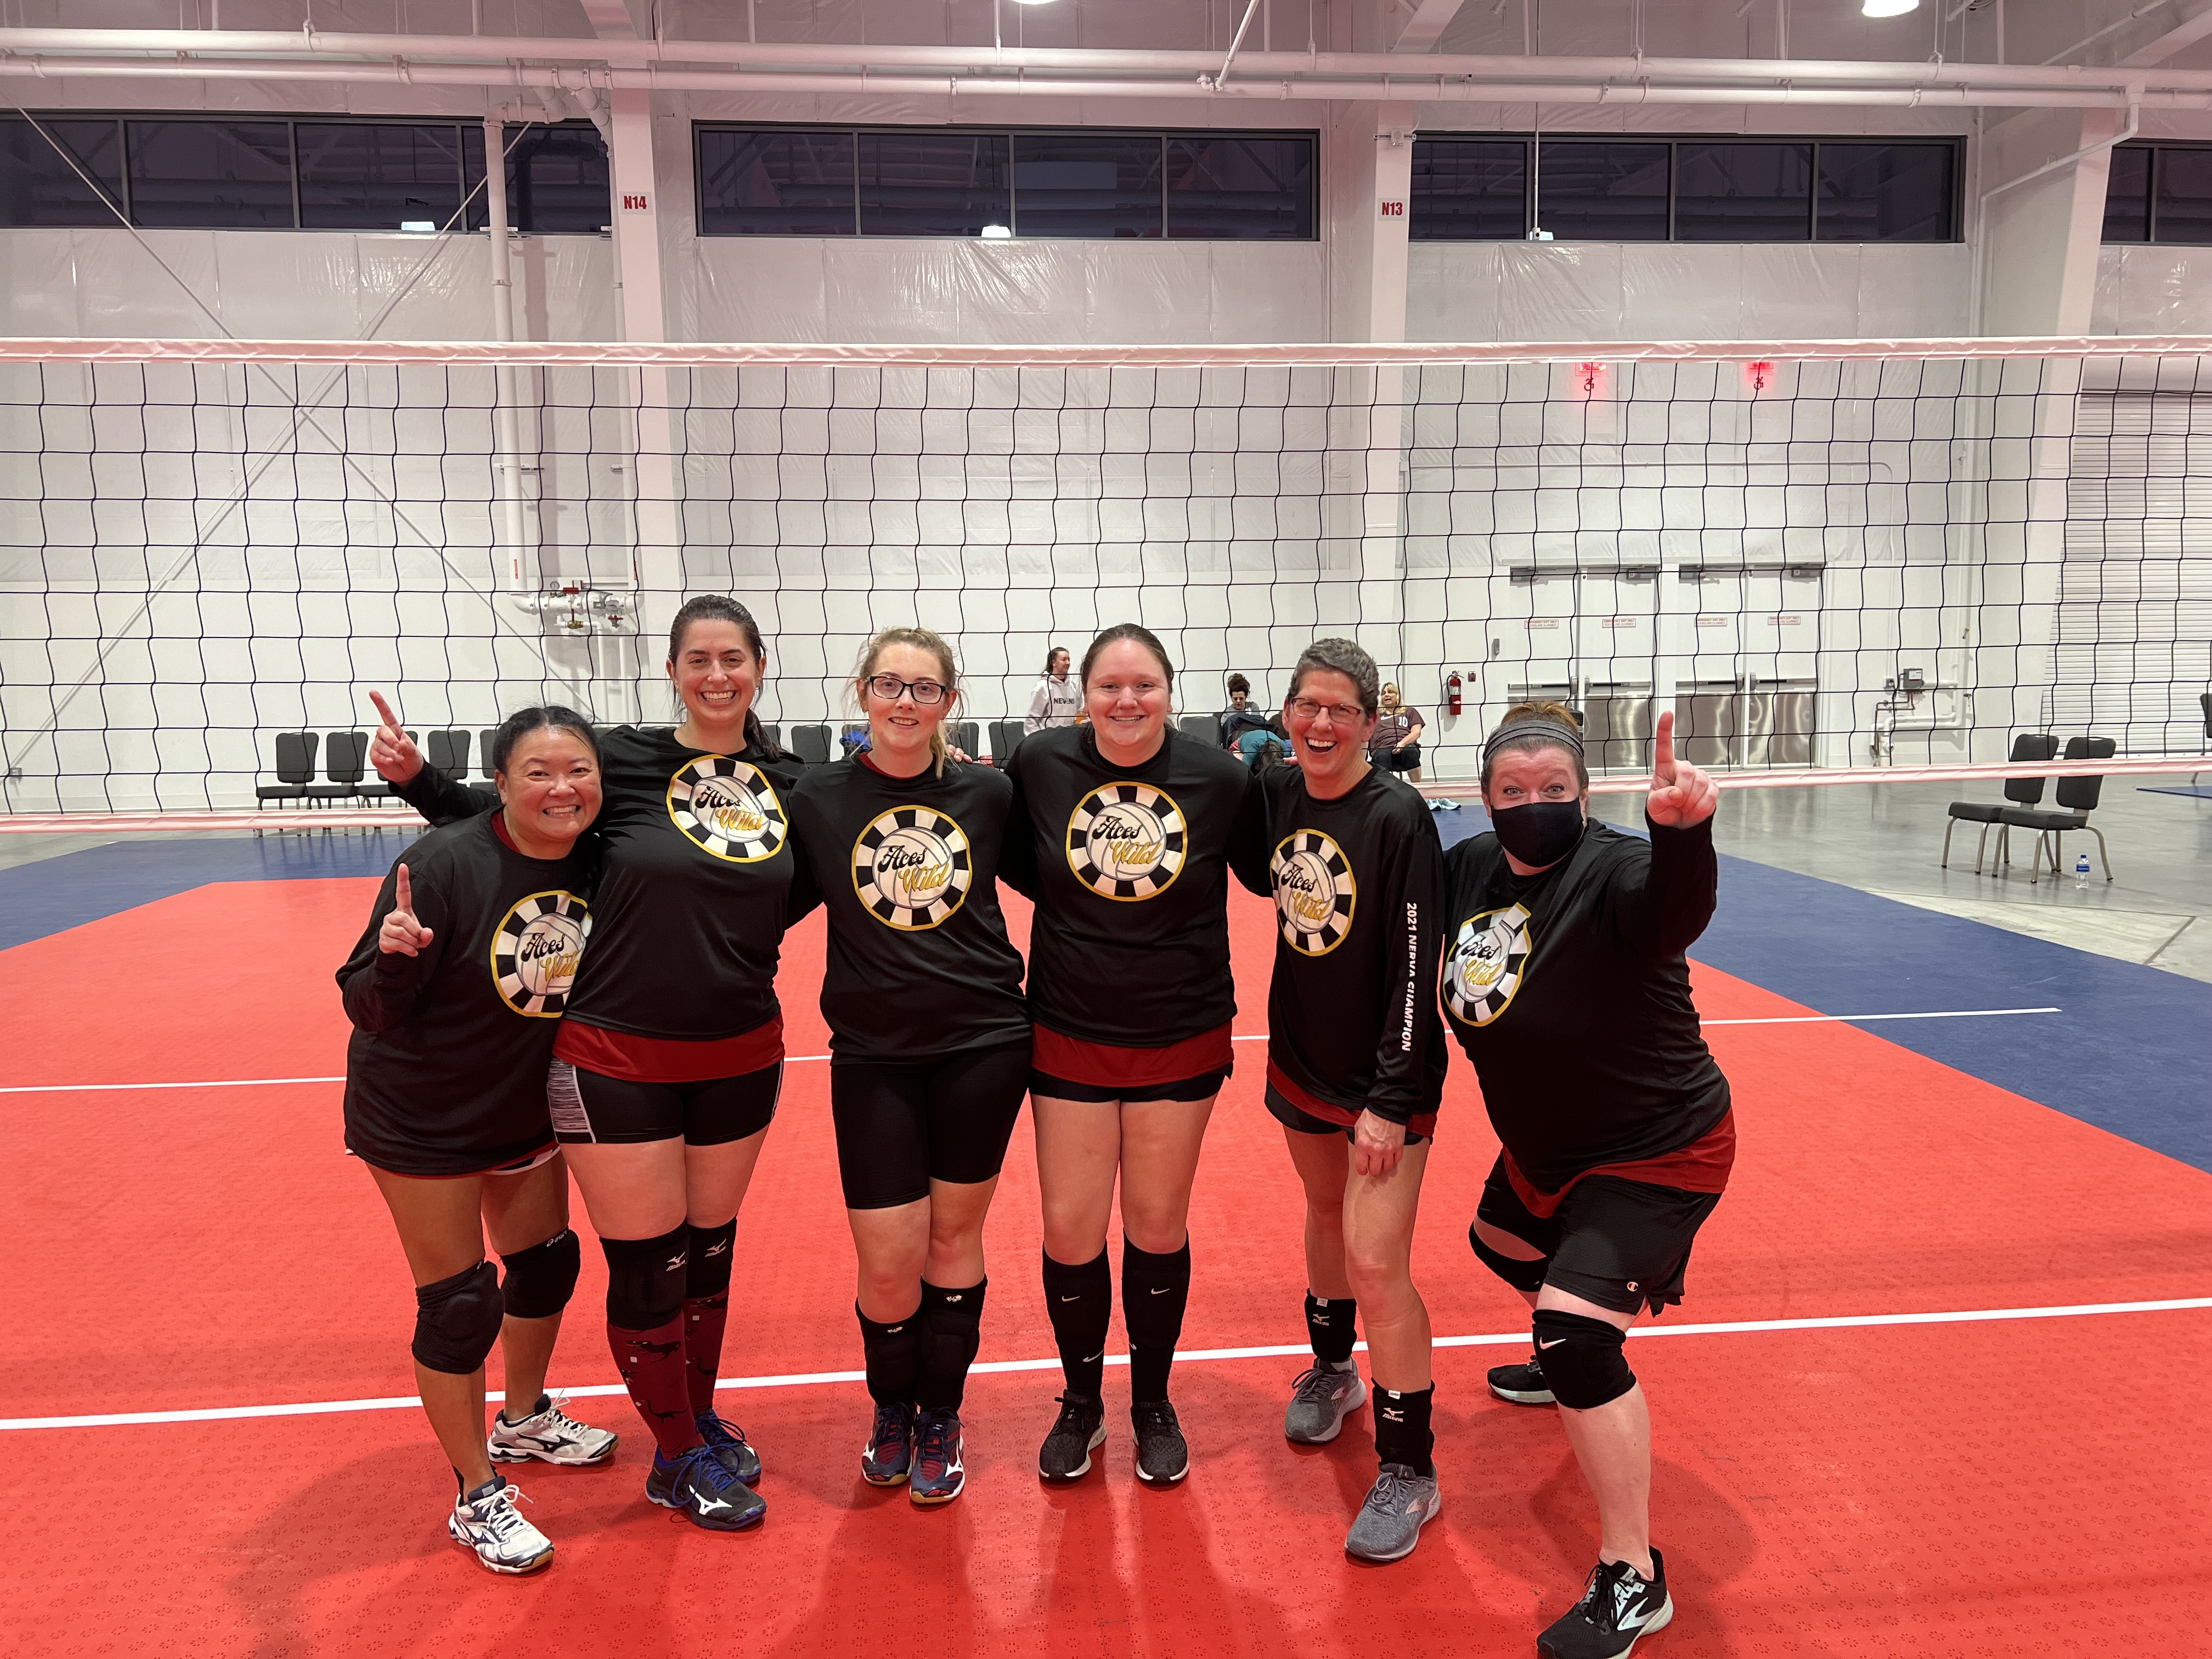 12/18/21  On Fire wins WC- over Volleychicks at Aces Wild